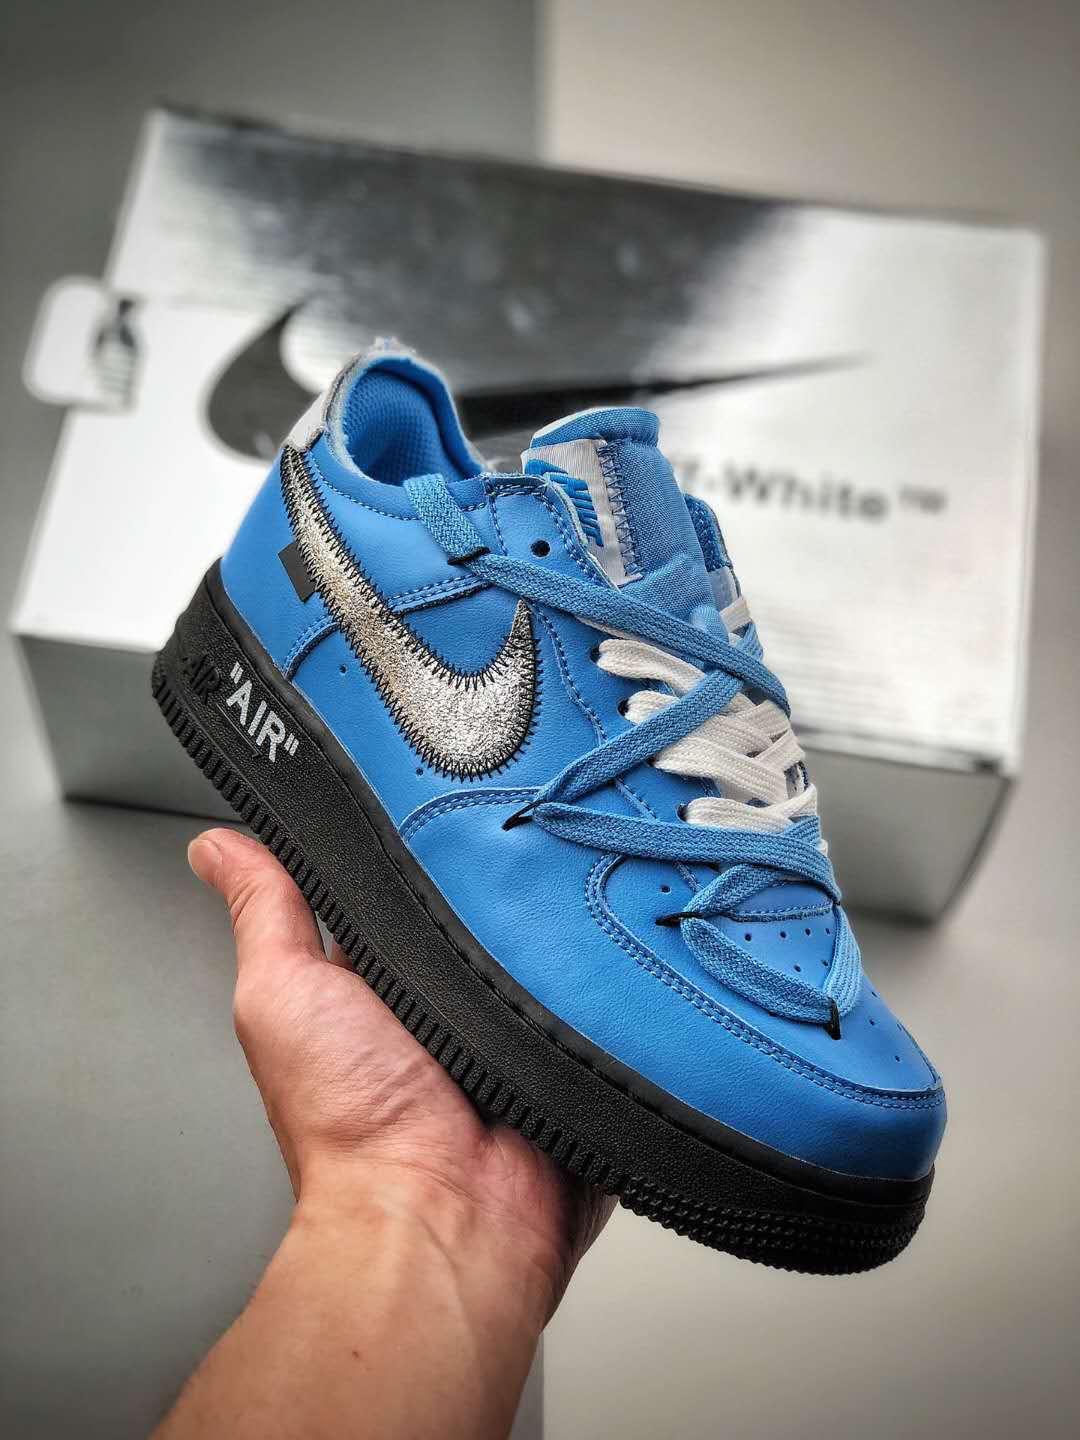 Nike Off-White Air Force 1 "MCA Sample" Blue Silver CK0866-401 | Limited Edition Sneakers